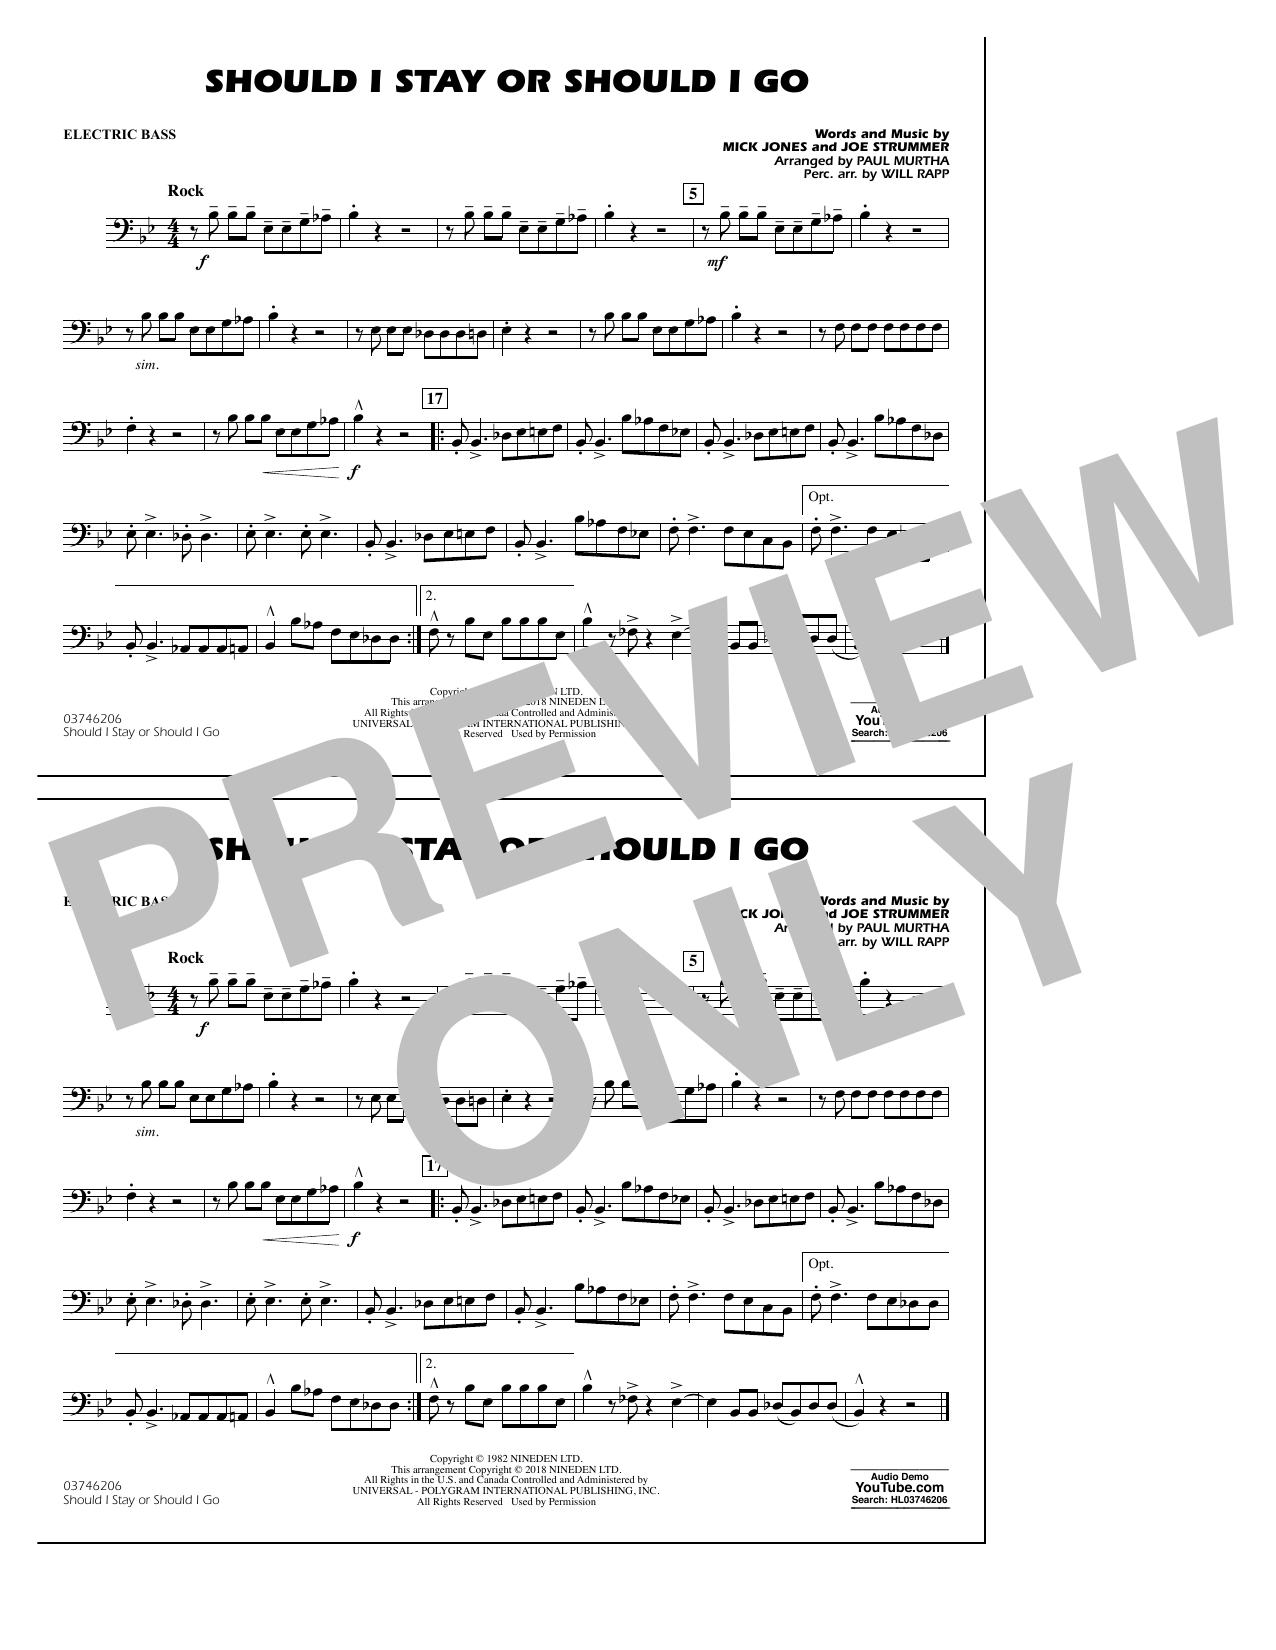 Download Paul Murtha Should I Stay Or Should I Go - Electric Sheet Music